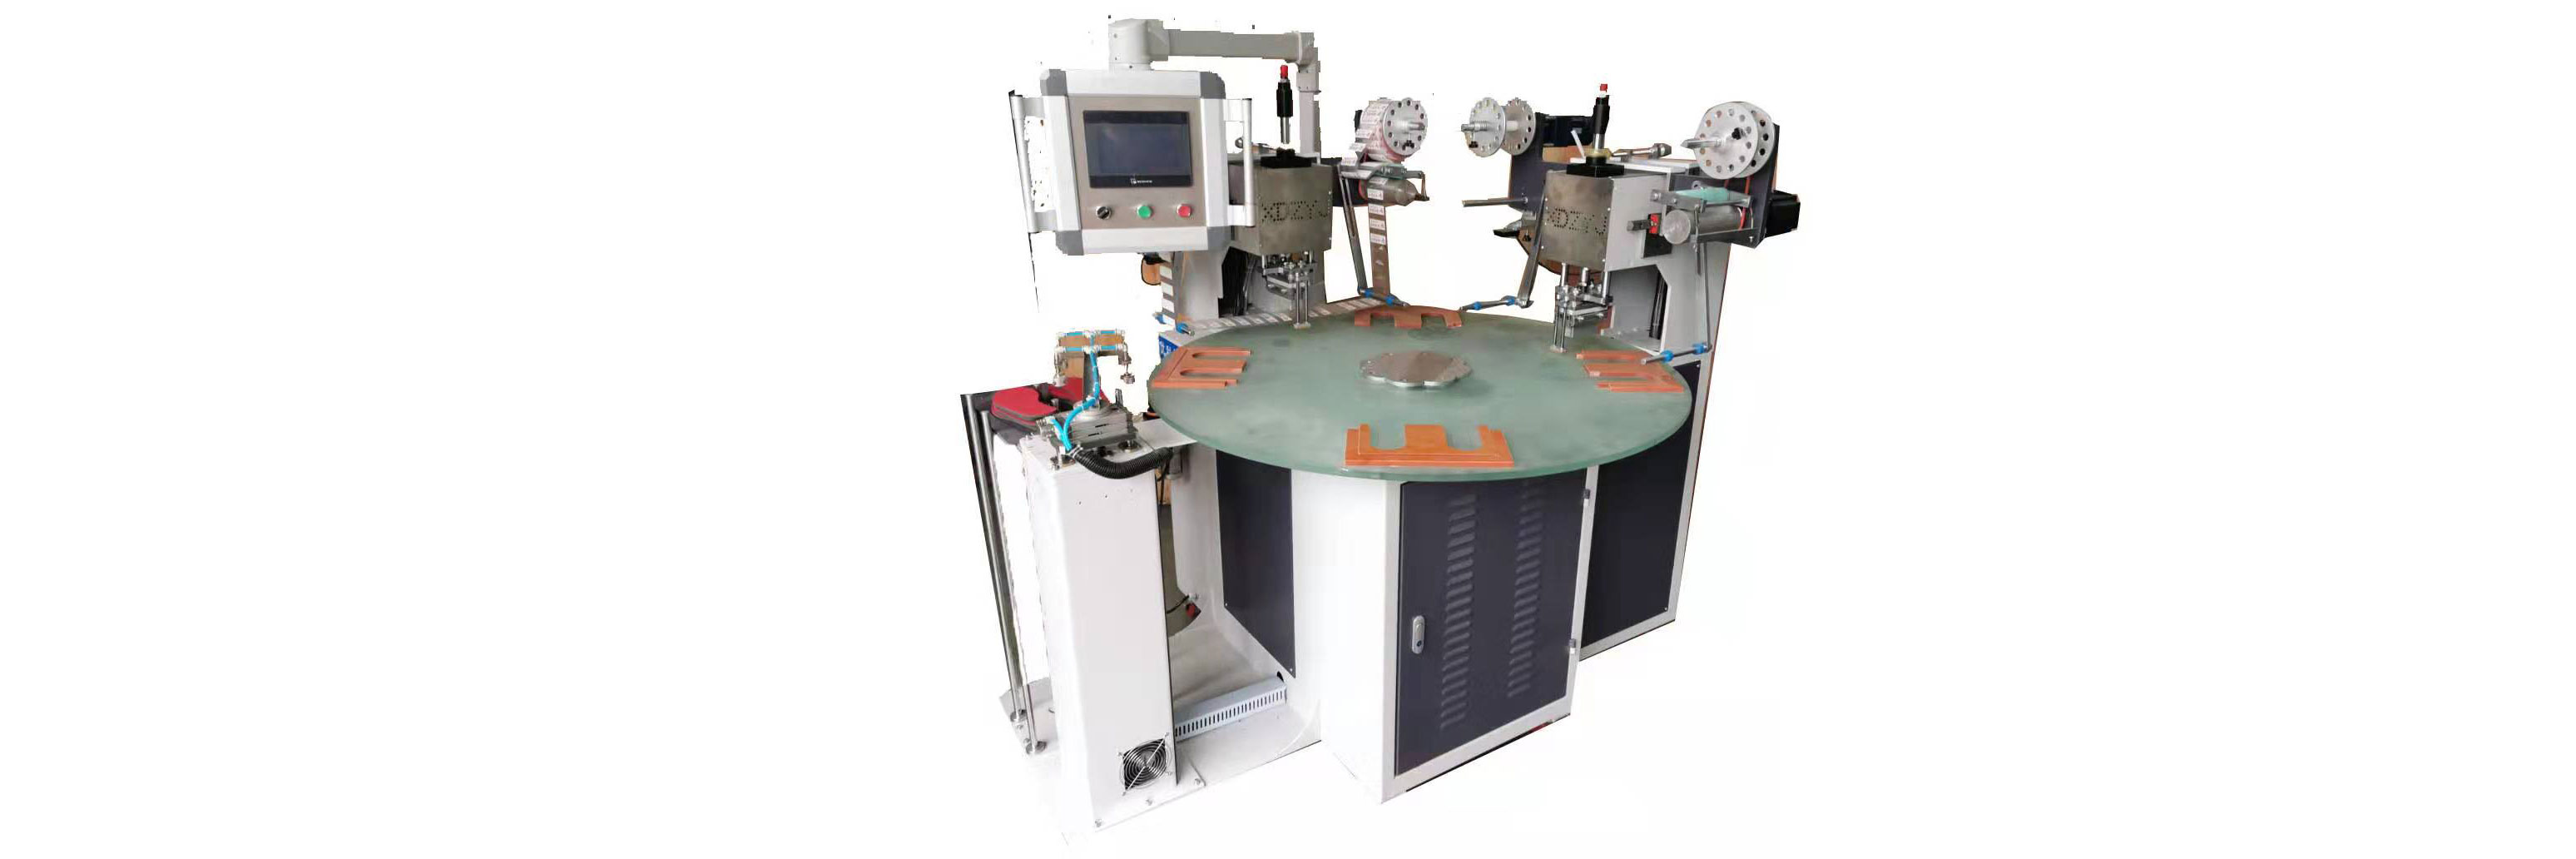 Four station heat transfer, fast and accurate yl-8906 double head disc transfer machine!